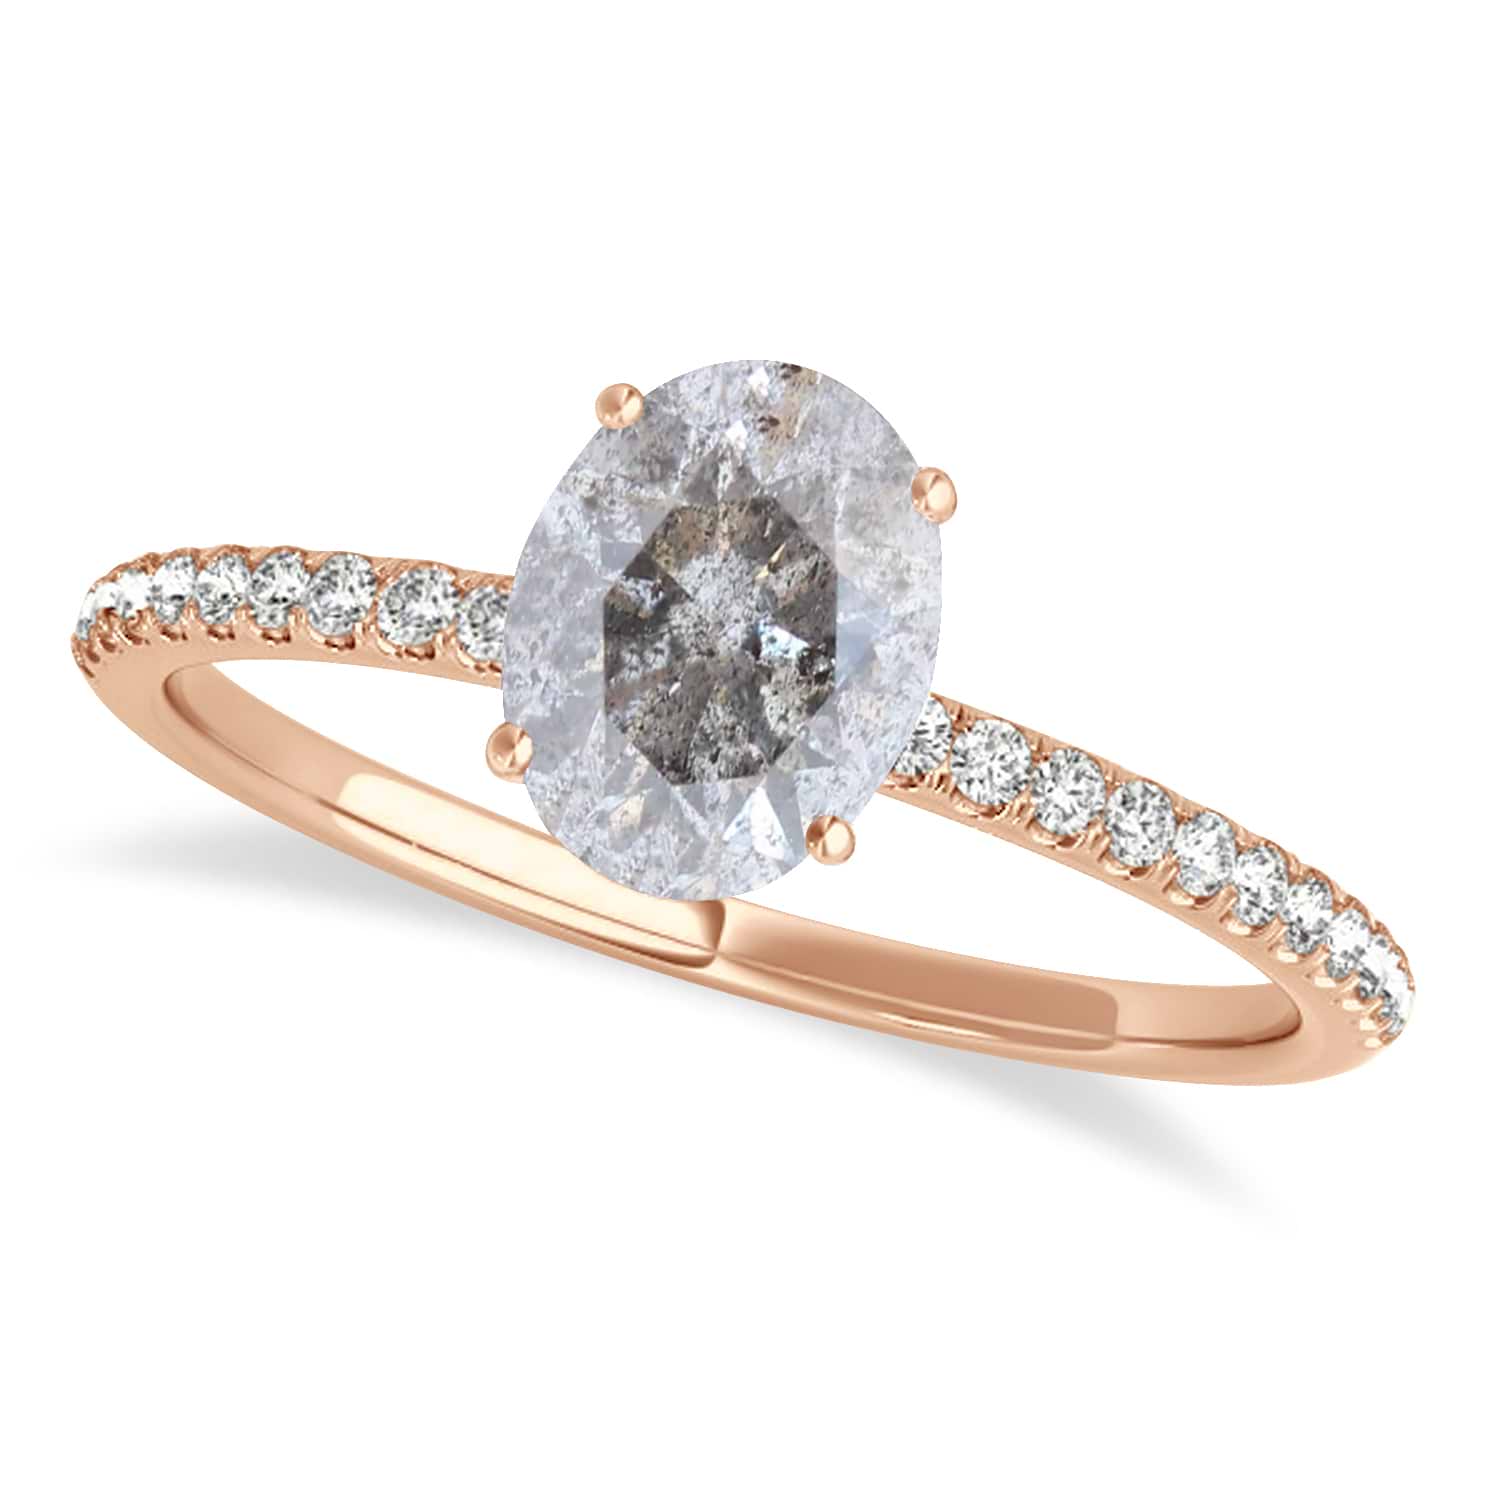 Oval Salt & Pepper Diamond Accented  Engagement Ring 14k Rose Gold (1.00ct)